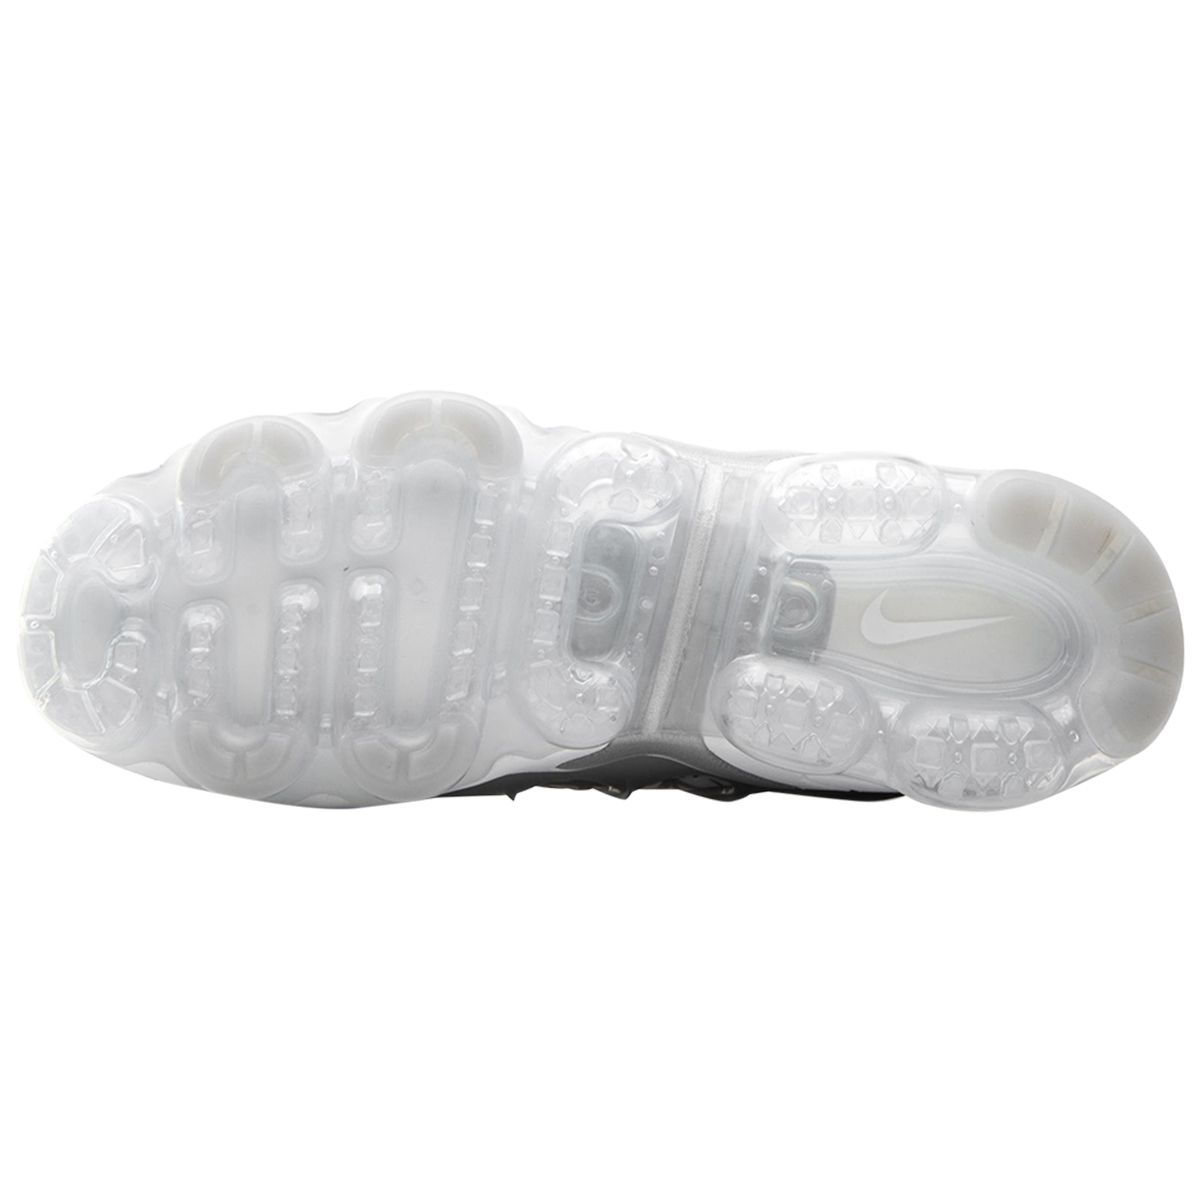 Nike Vapormax Plus Shoes For Sports and Fitness